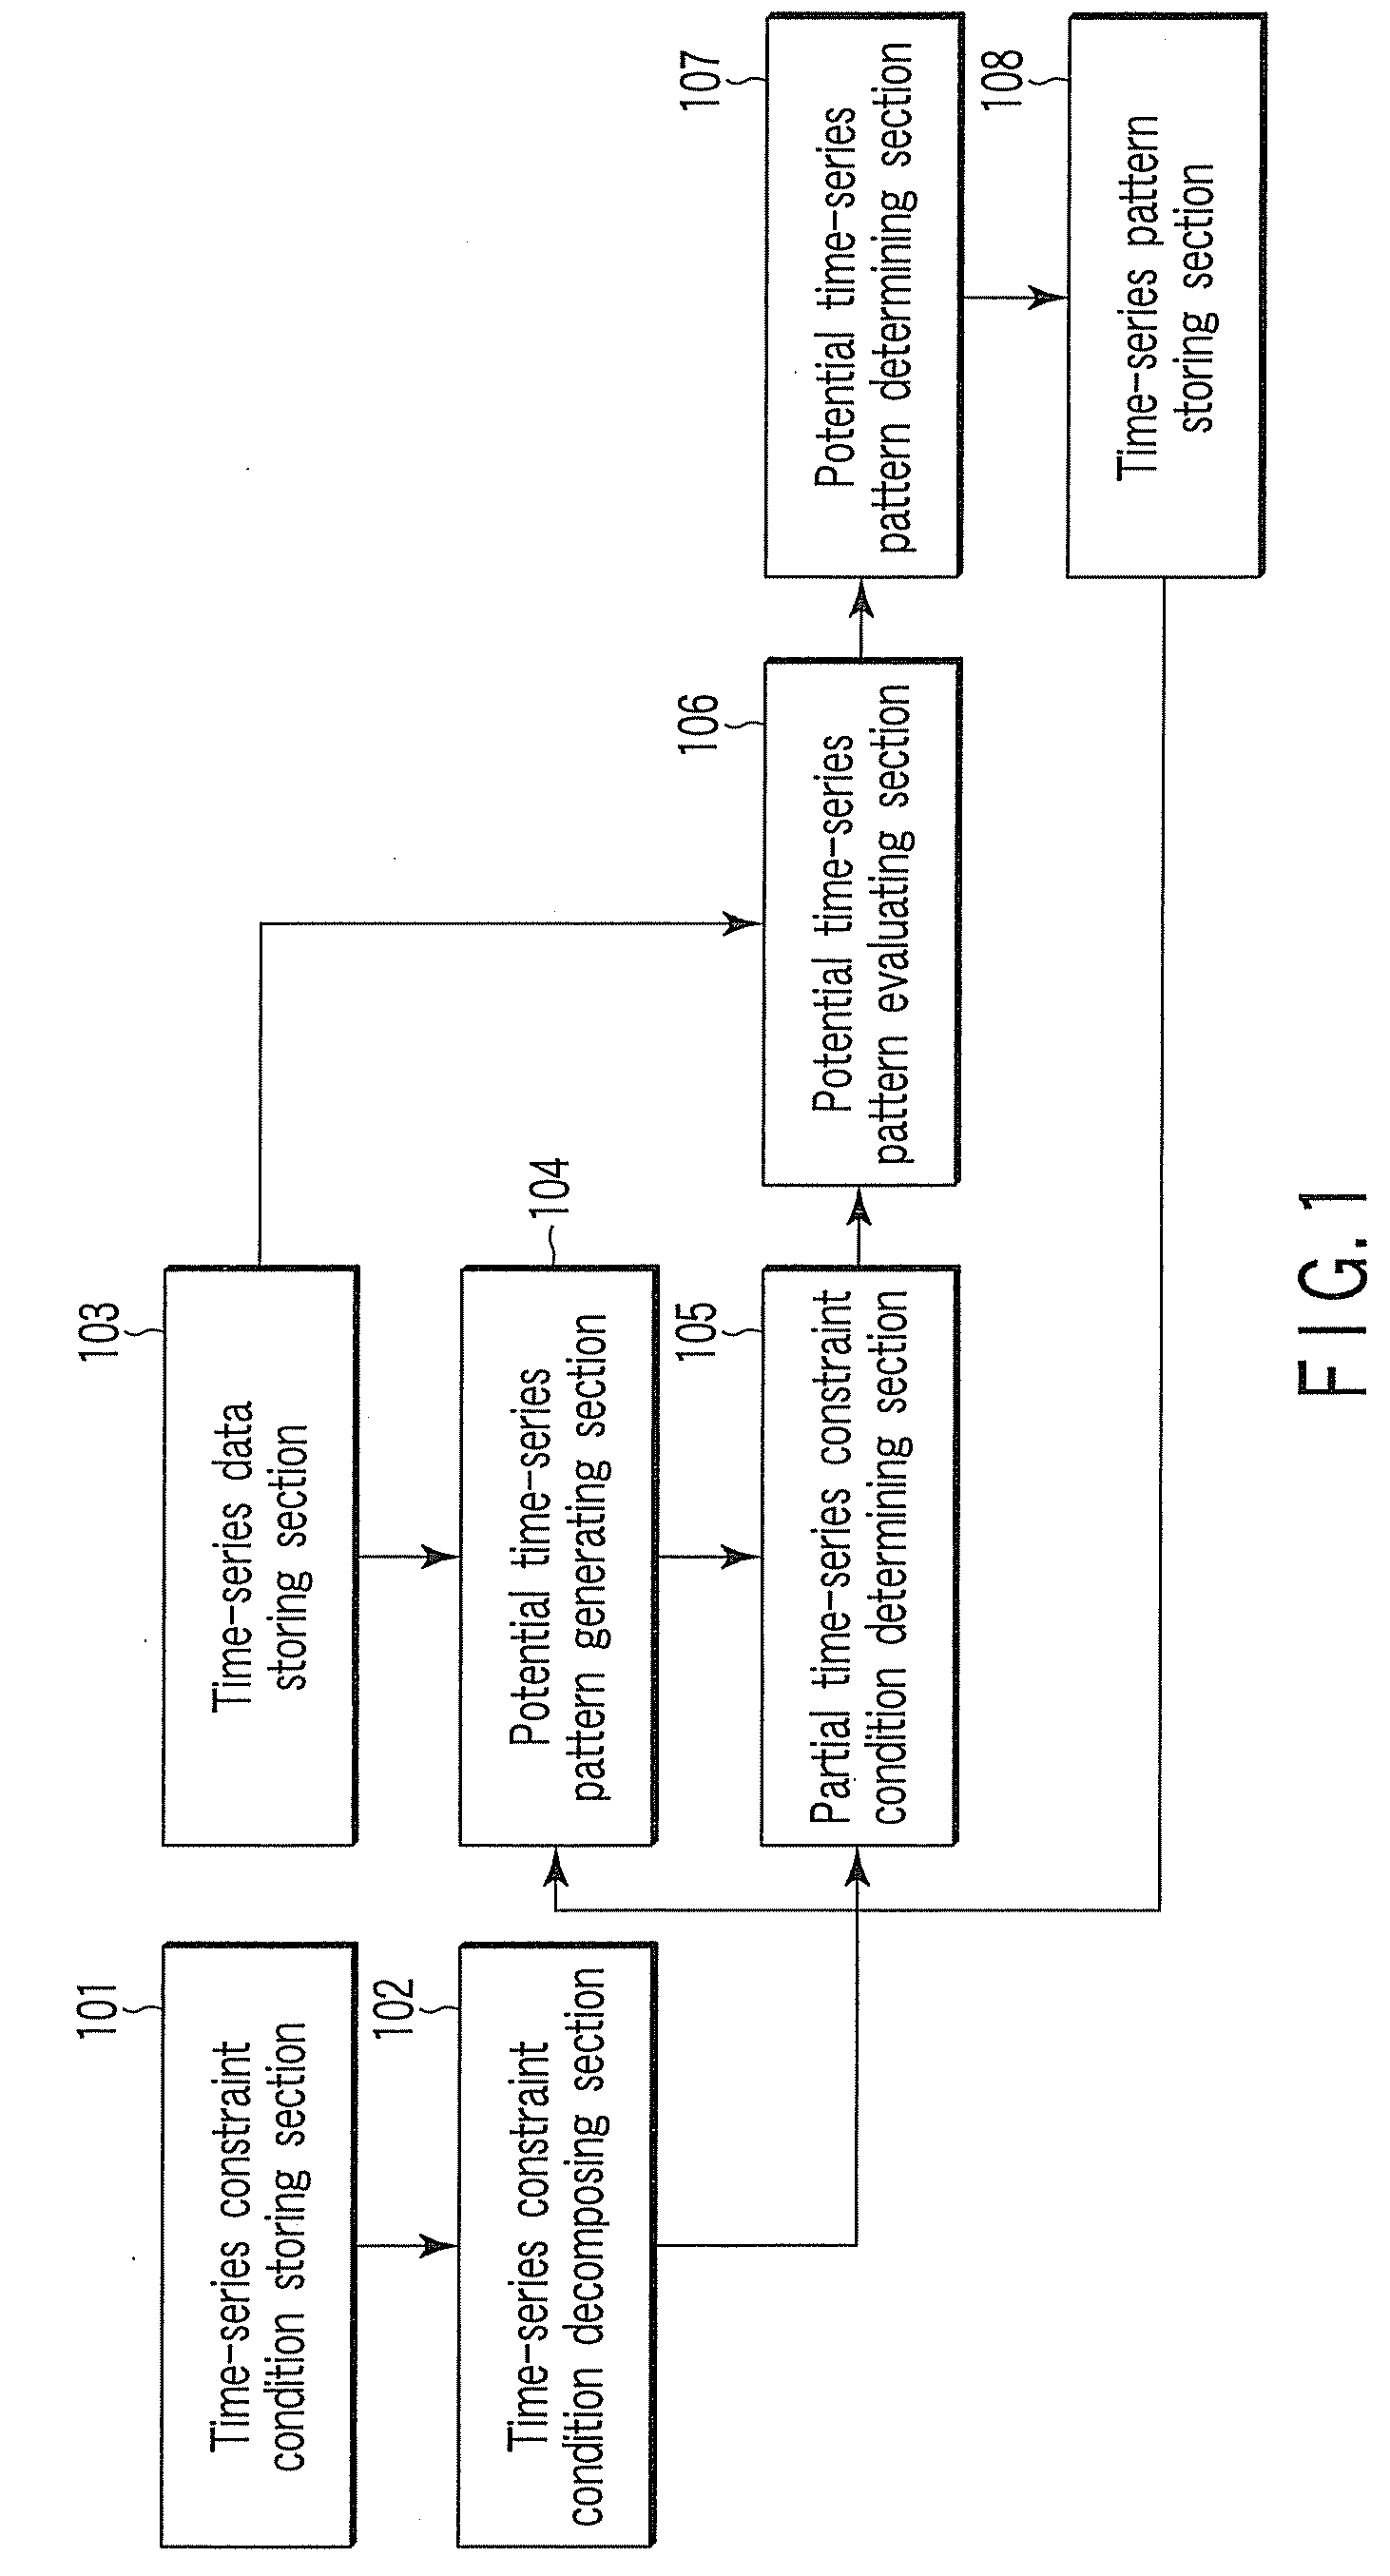 Time-series pattern finding apparatus, method and program